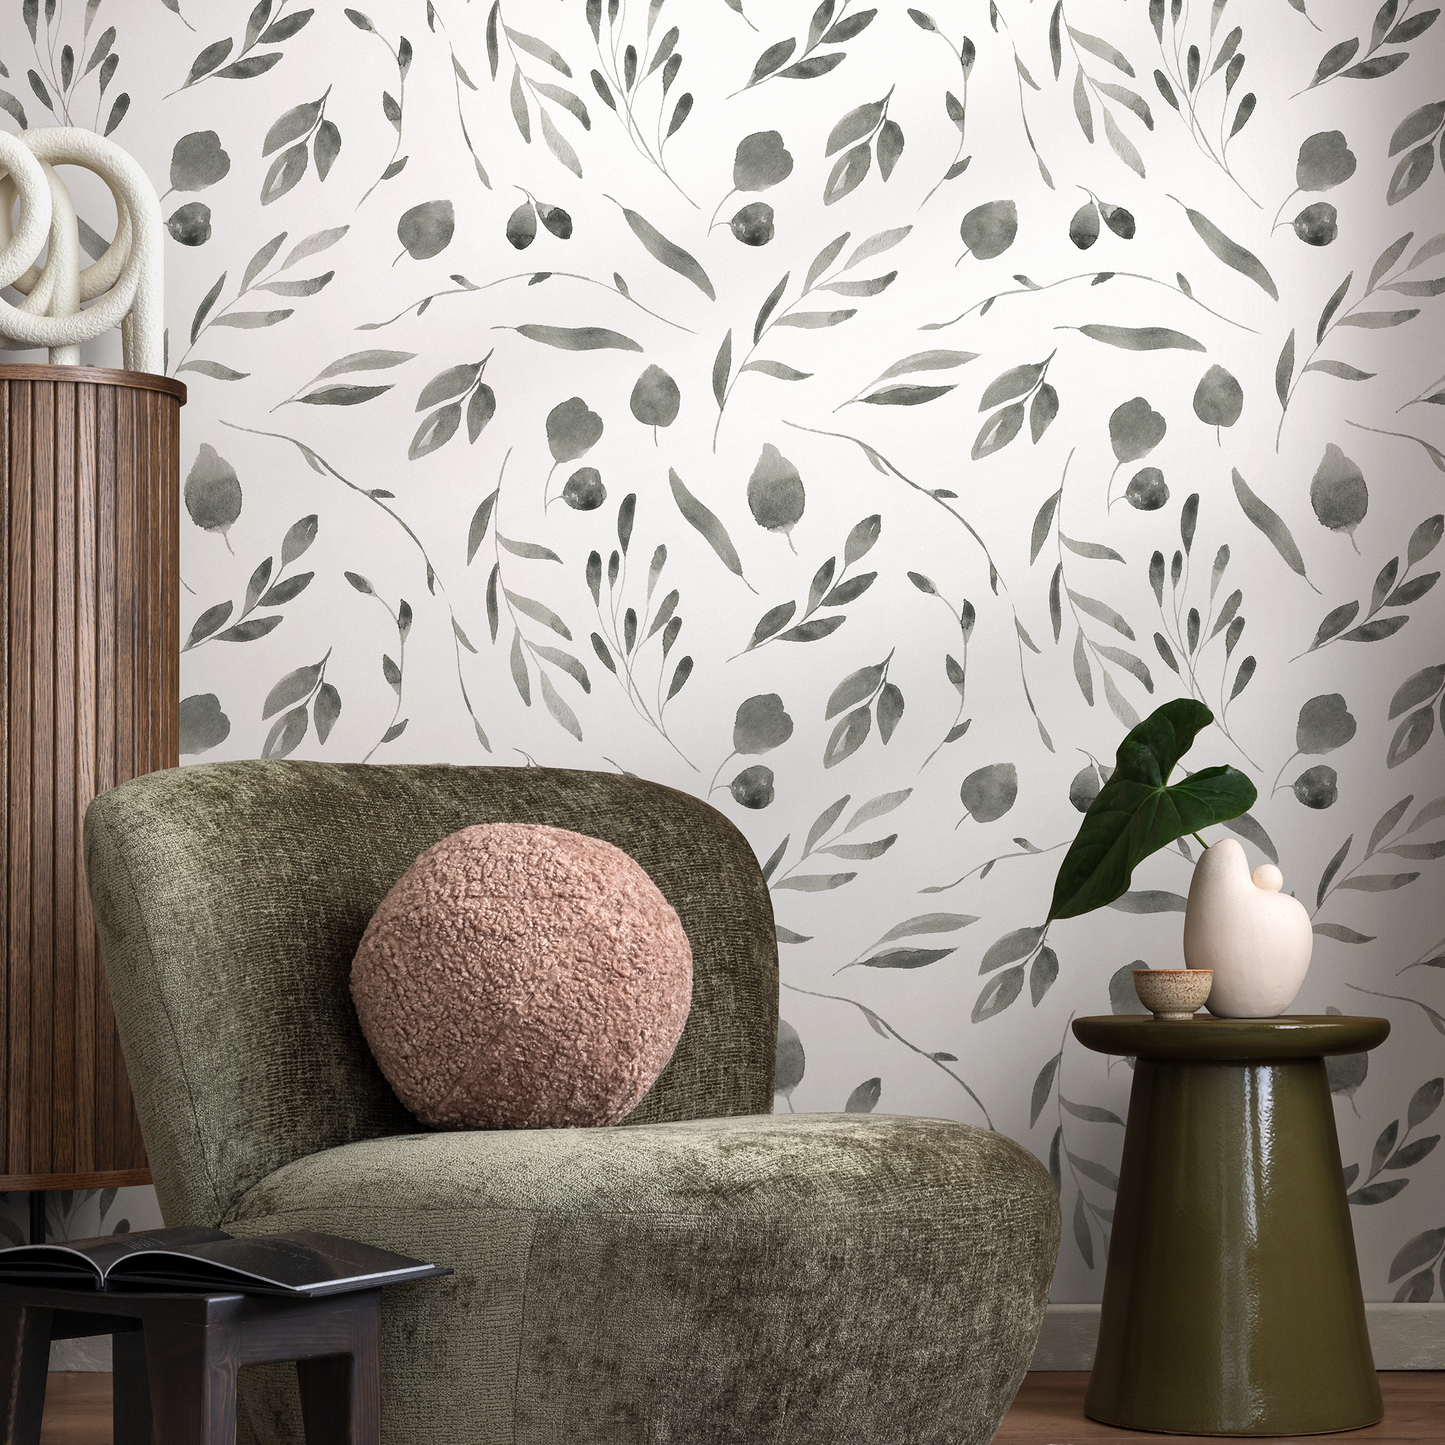 Removable Wallpaper Peel and Stick Wallpaper Wall Paper Wall Mural - Monochromatic Watercolor Leaves Wallpaper - B028